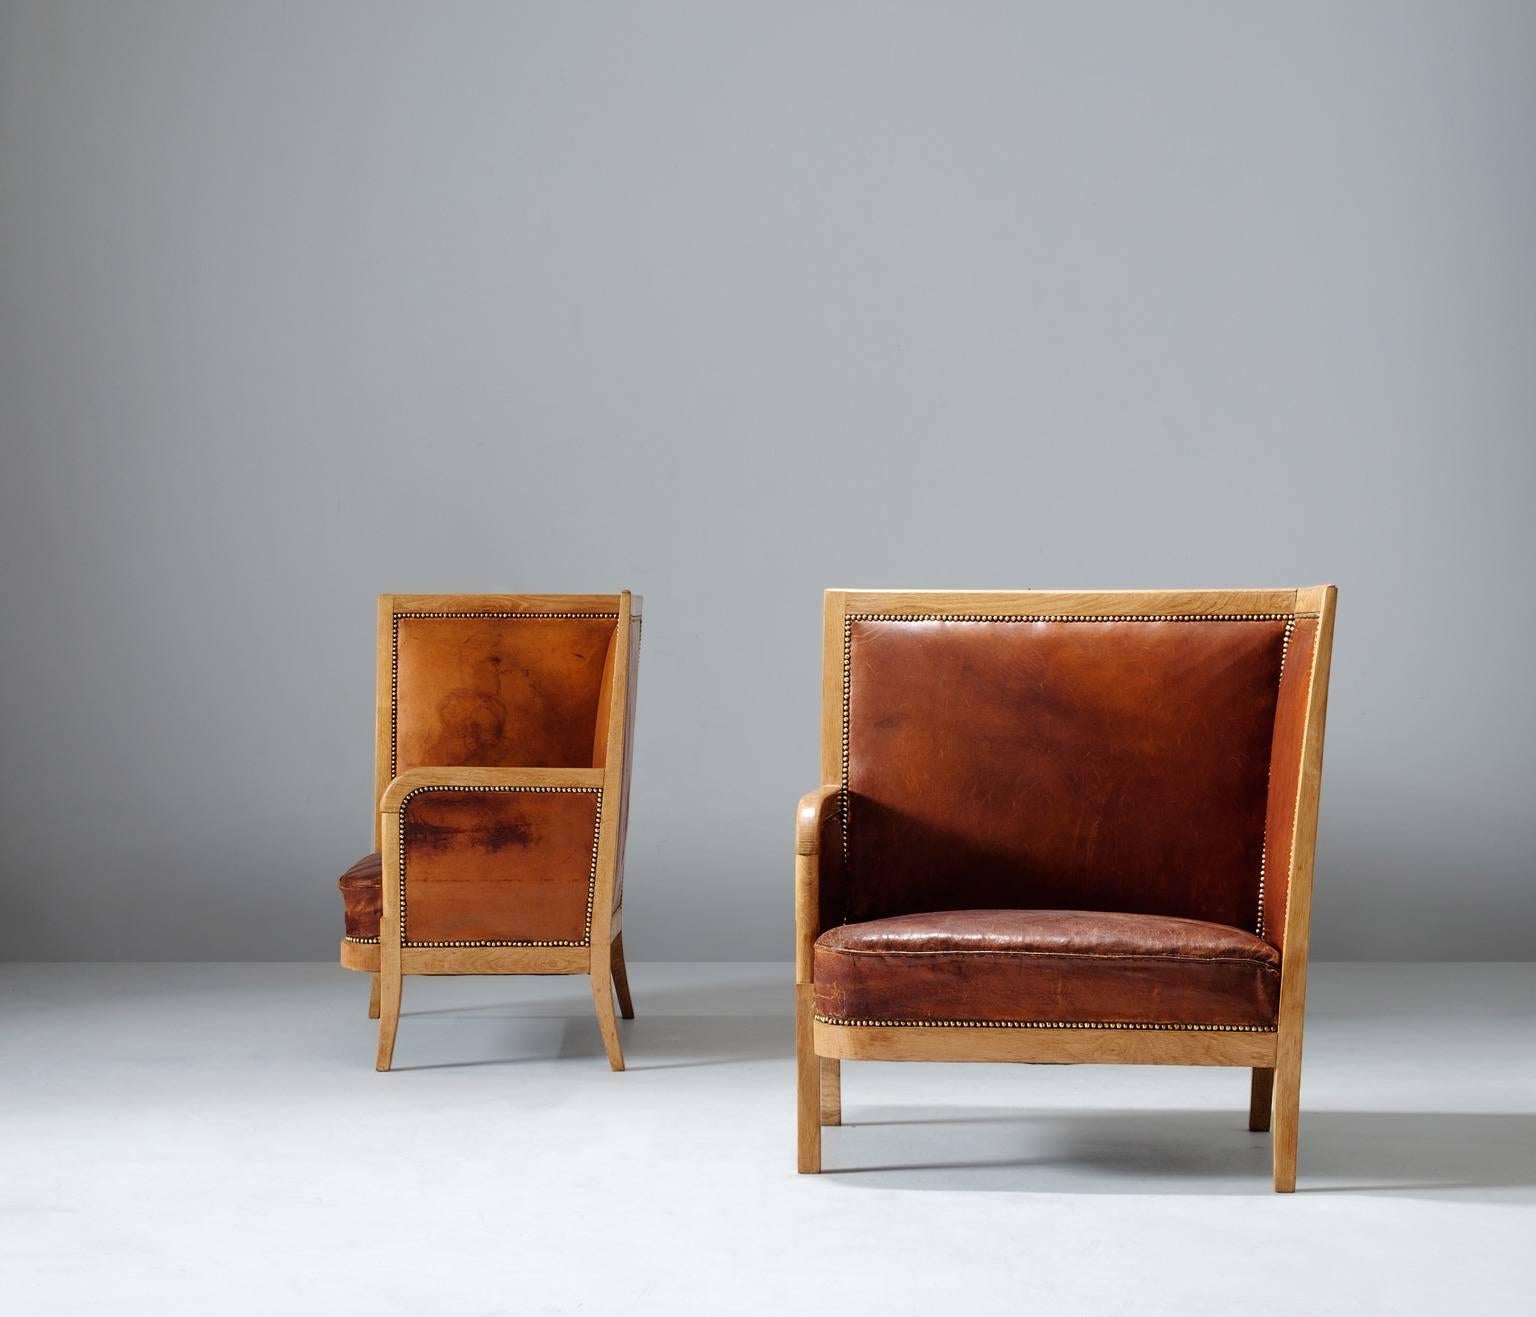 Set of two lounge chairs, in oak and leather, Scandinavia, 1940s. 

Set of two high back chairs upholstered in high quality cognac leather.
This luxurious set is made of an oak frame with nice round shapes and lines
decorated with brass studs to